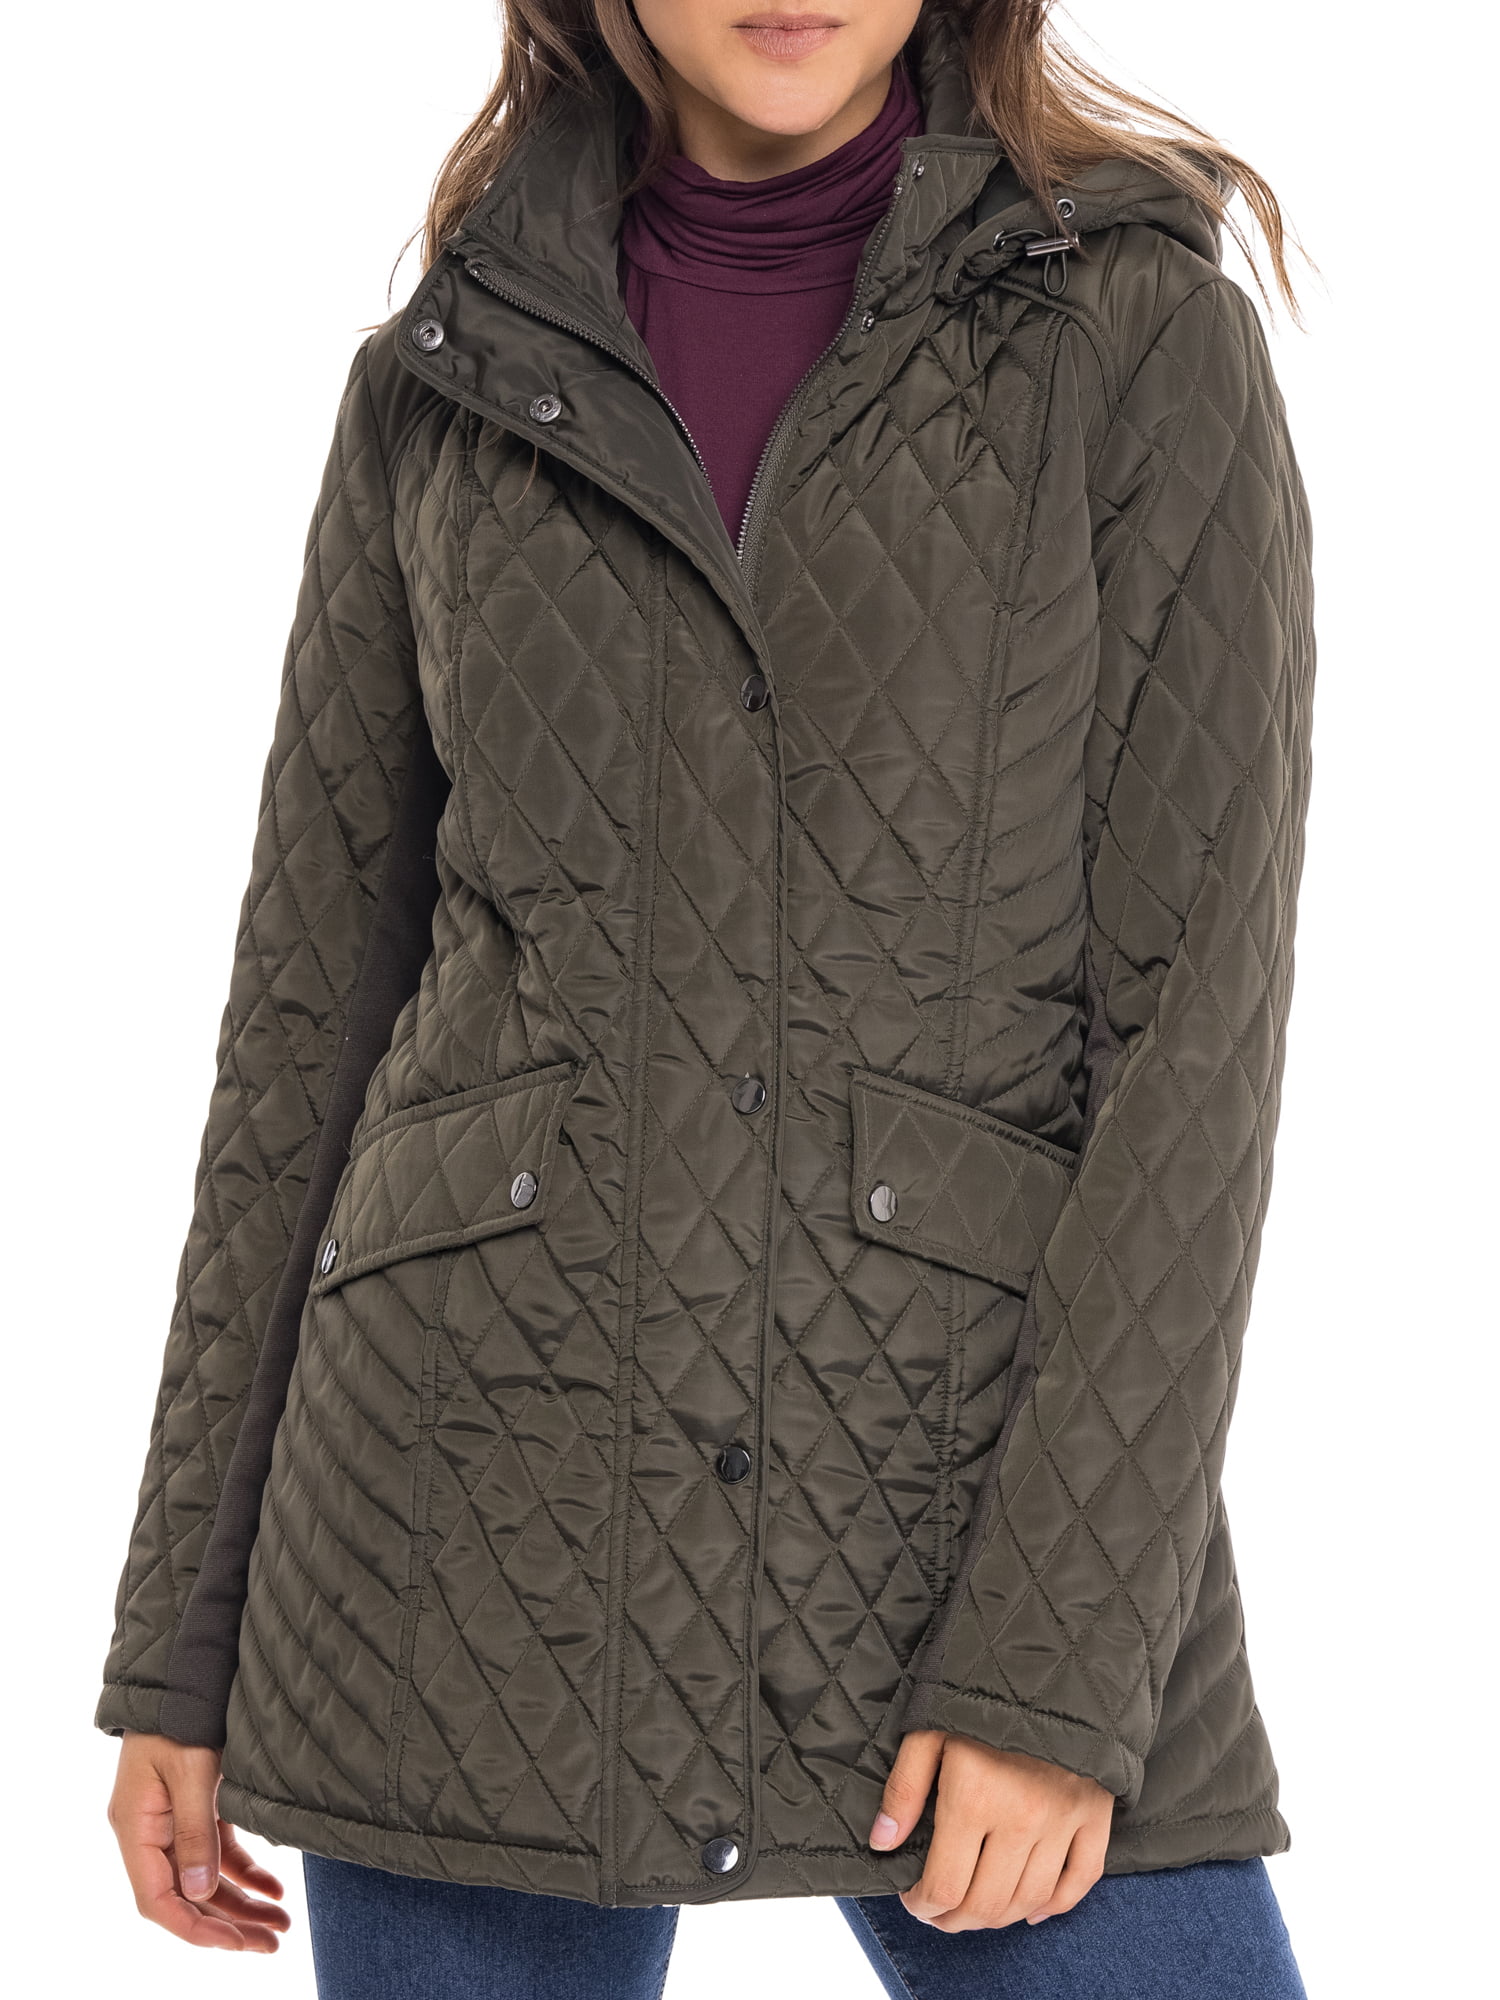 S.E.B. by Sebby Quilted Jacket with Detachable Hood (Women’s) - Walmart.com